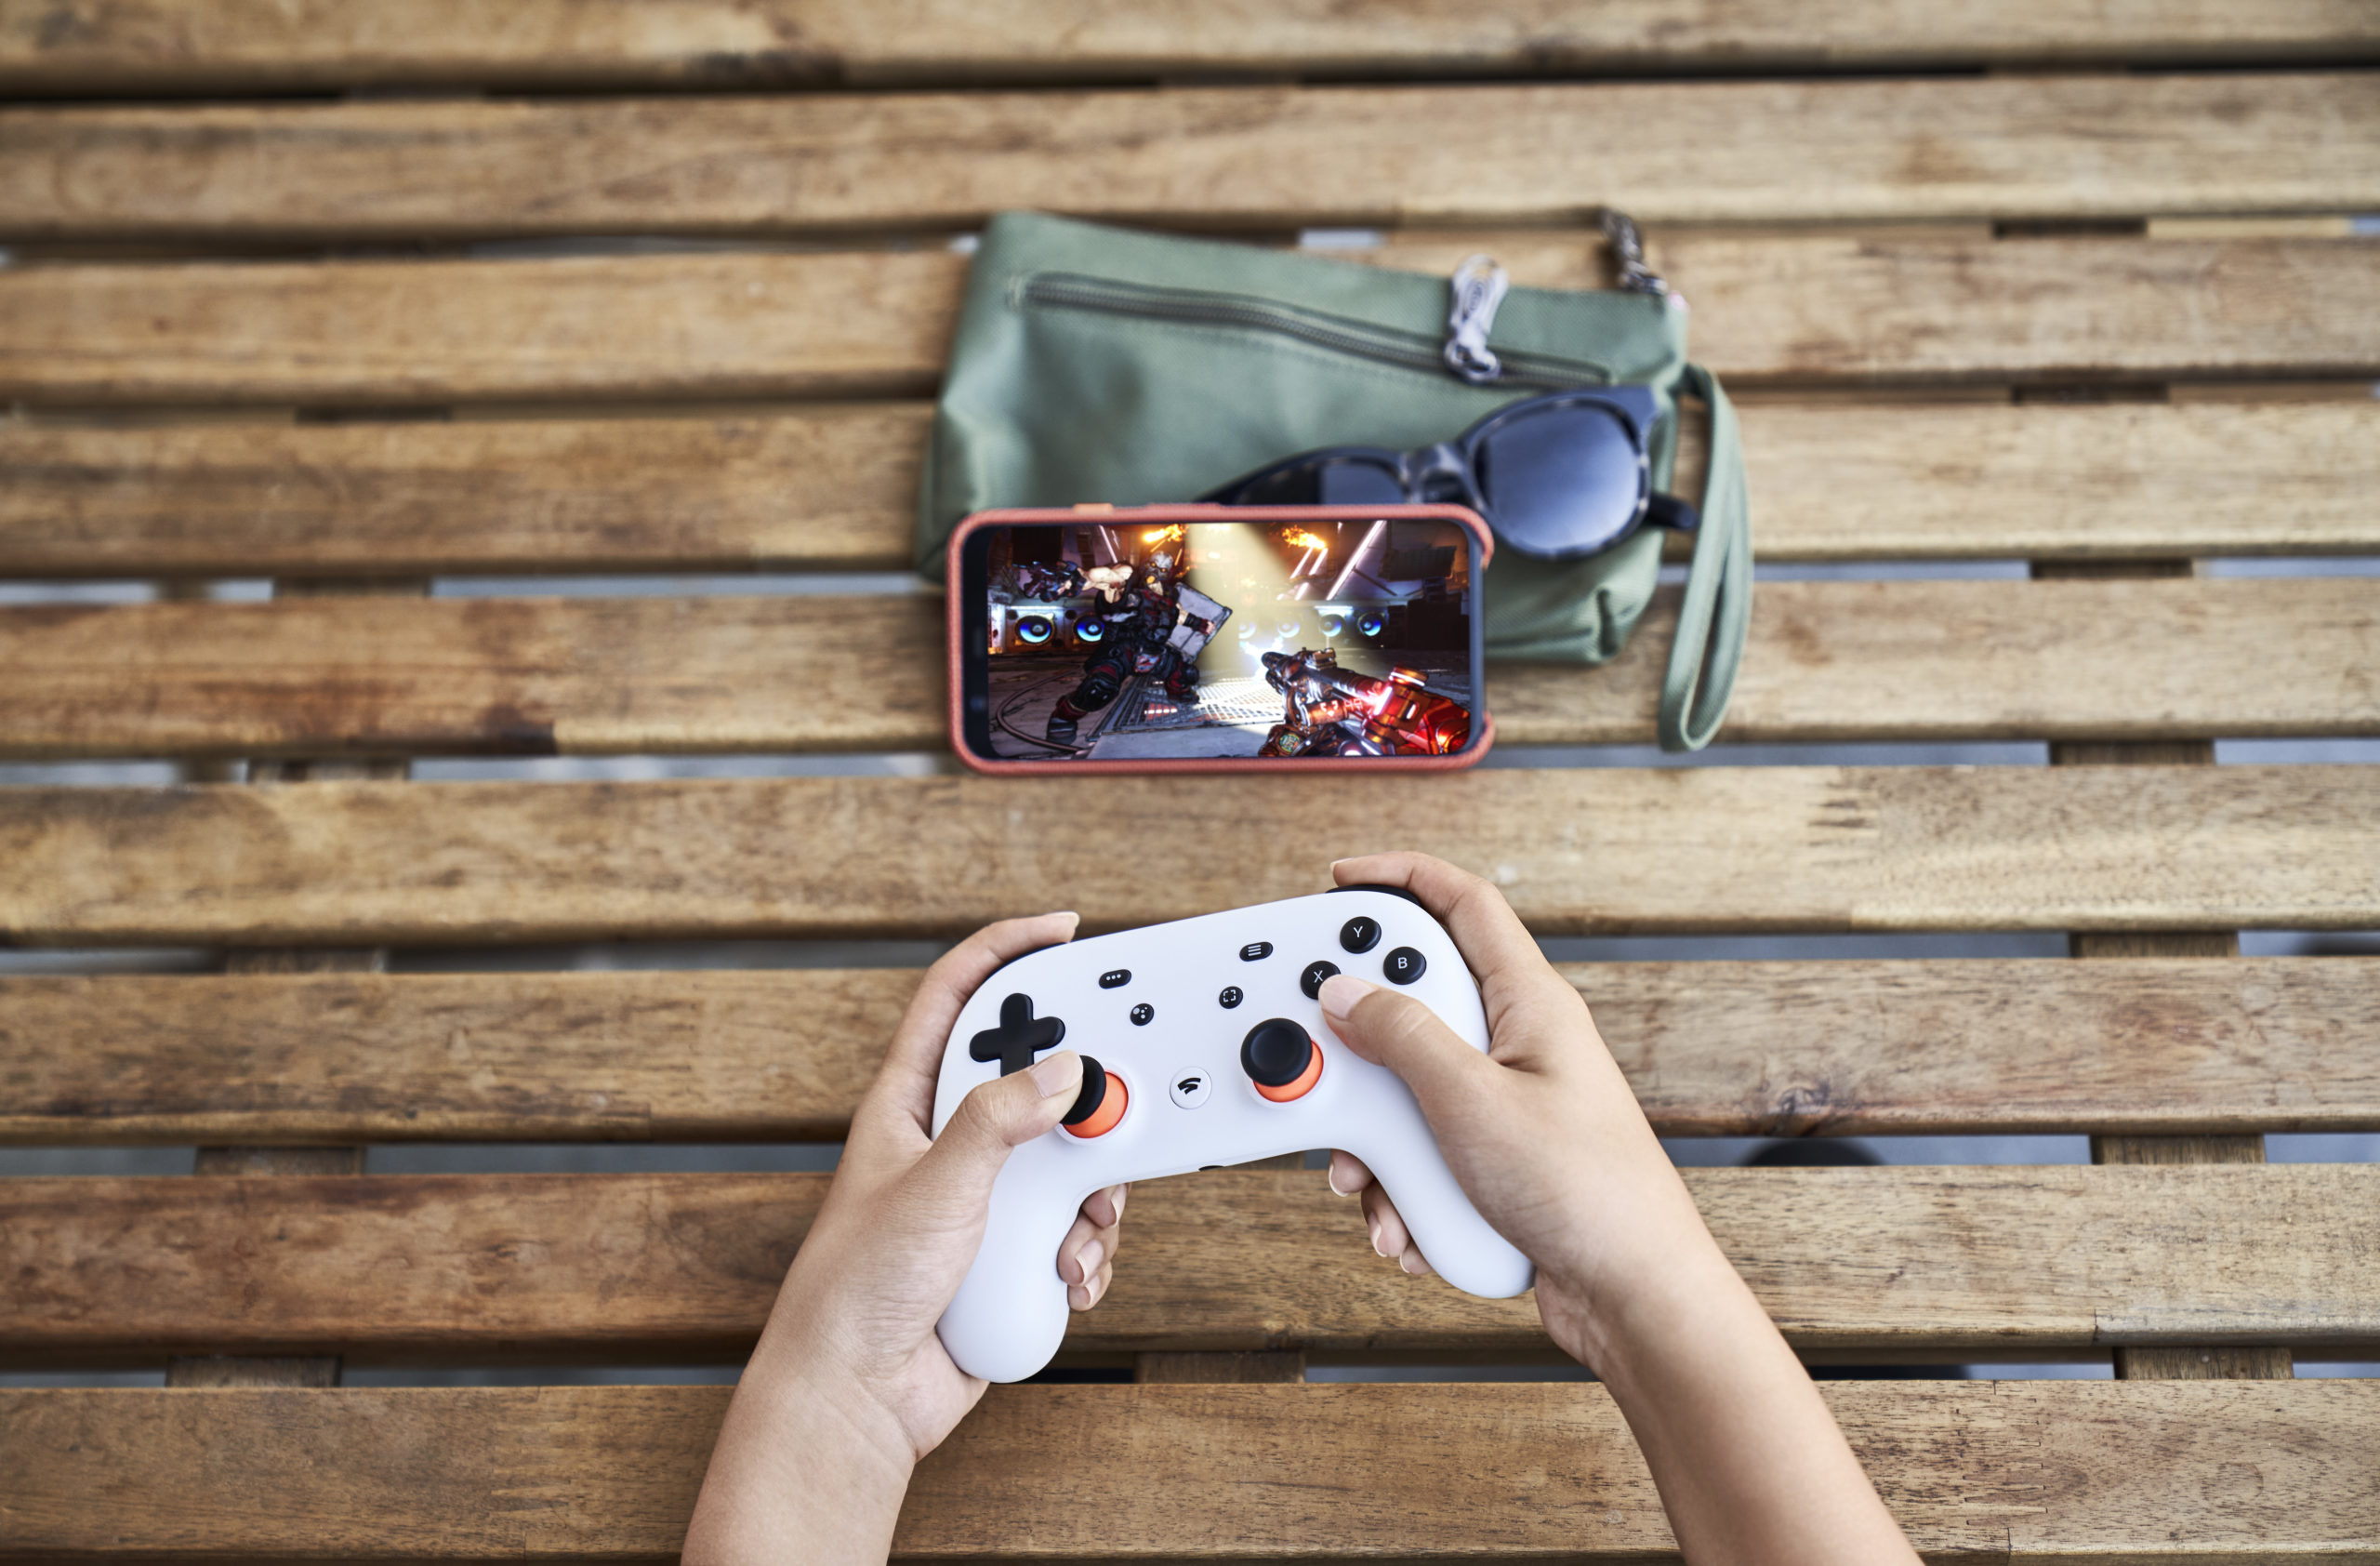  YouTube Premium subscribers can receive three months of Stadia Pro free of charge